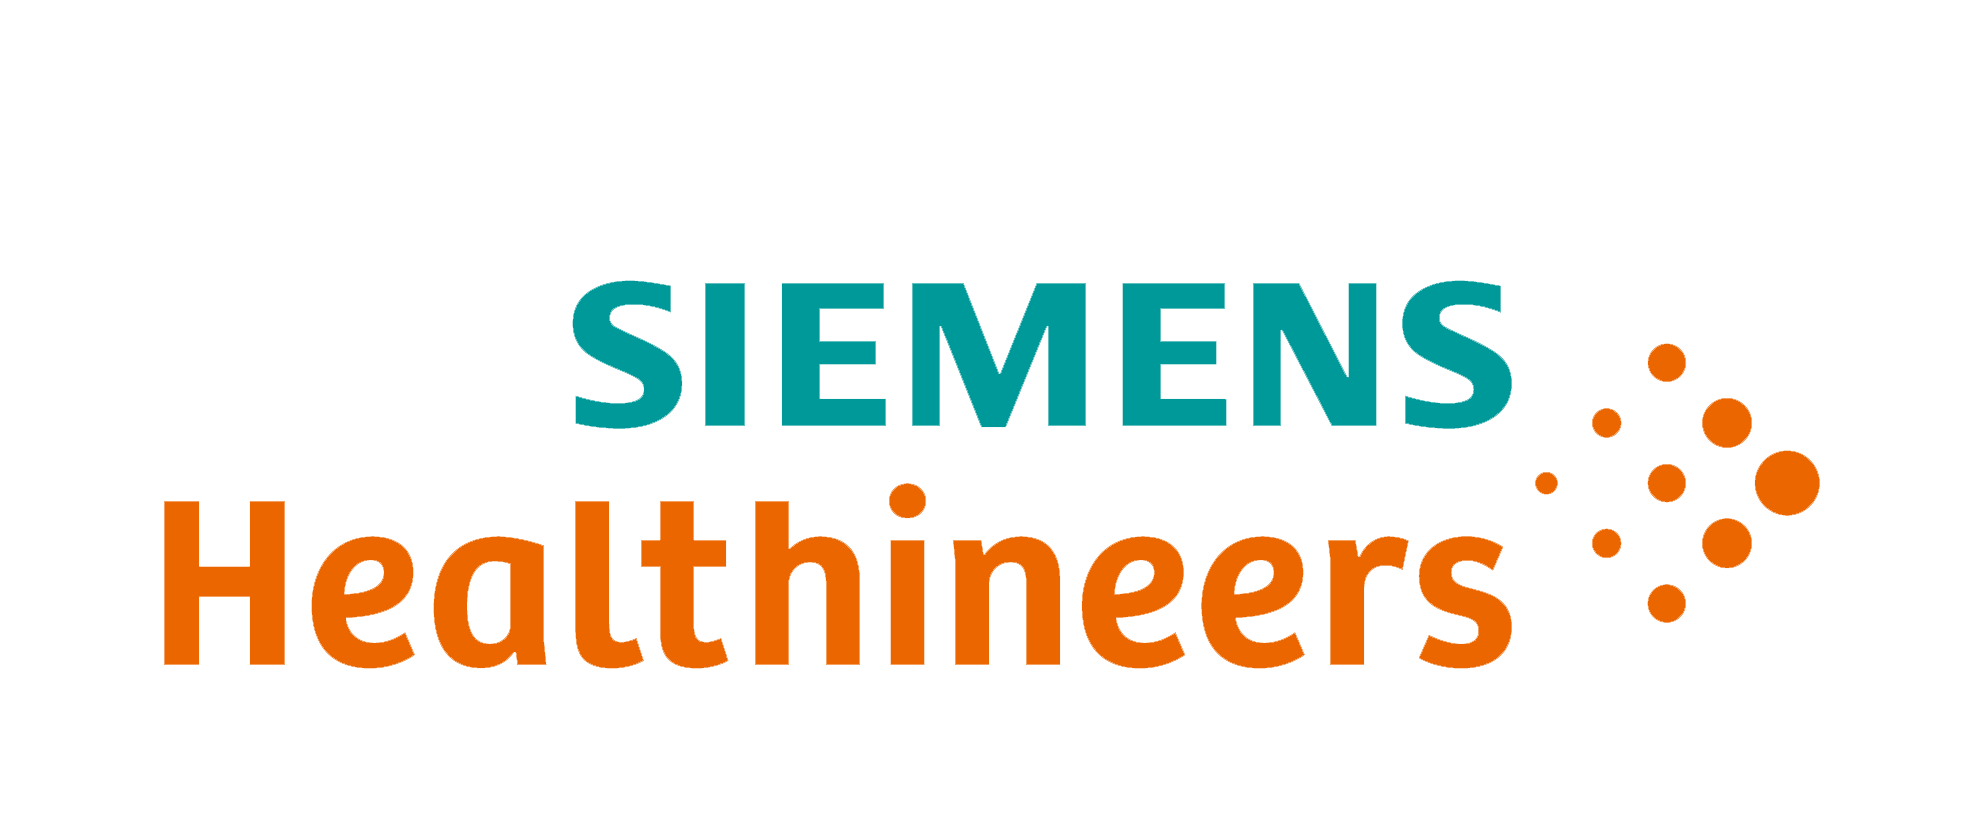 Press Release | June 1St, 2017   Siemens Healthineers Announced The Closing Of The Acquisition Of Medicalis And The Integration Of The Medicalis Solutions Hdpng.com  - Siemens, Transparent background PNG HD thumbnail